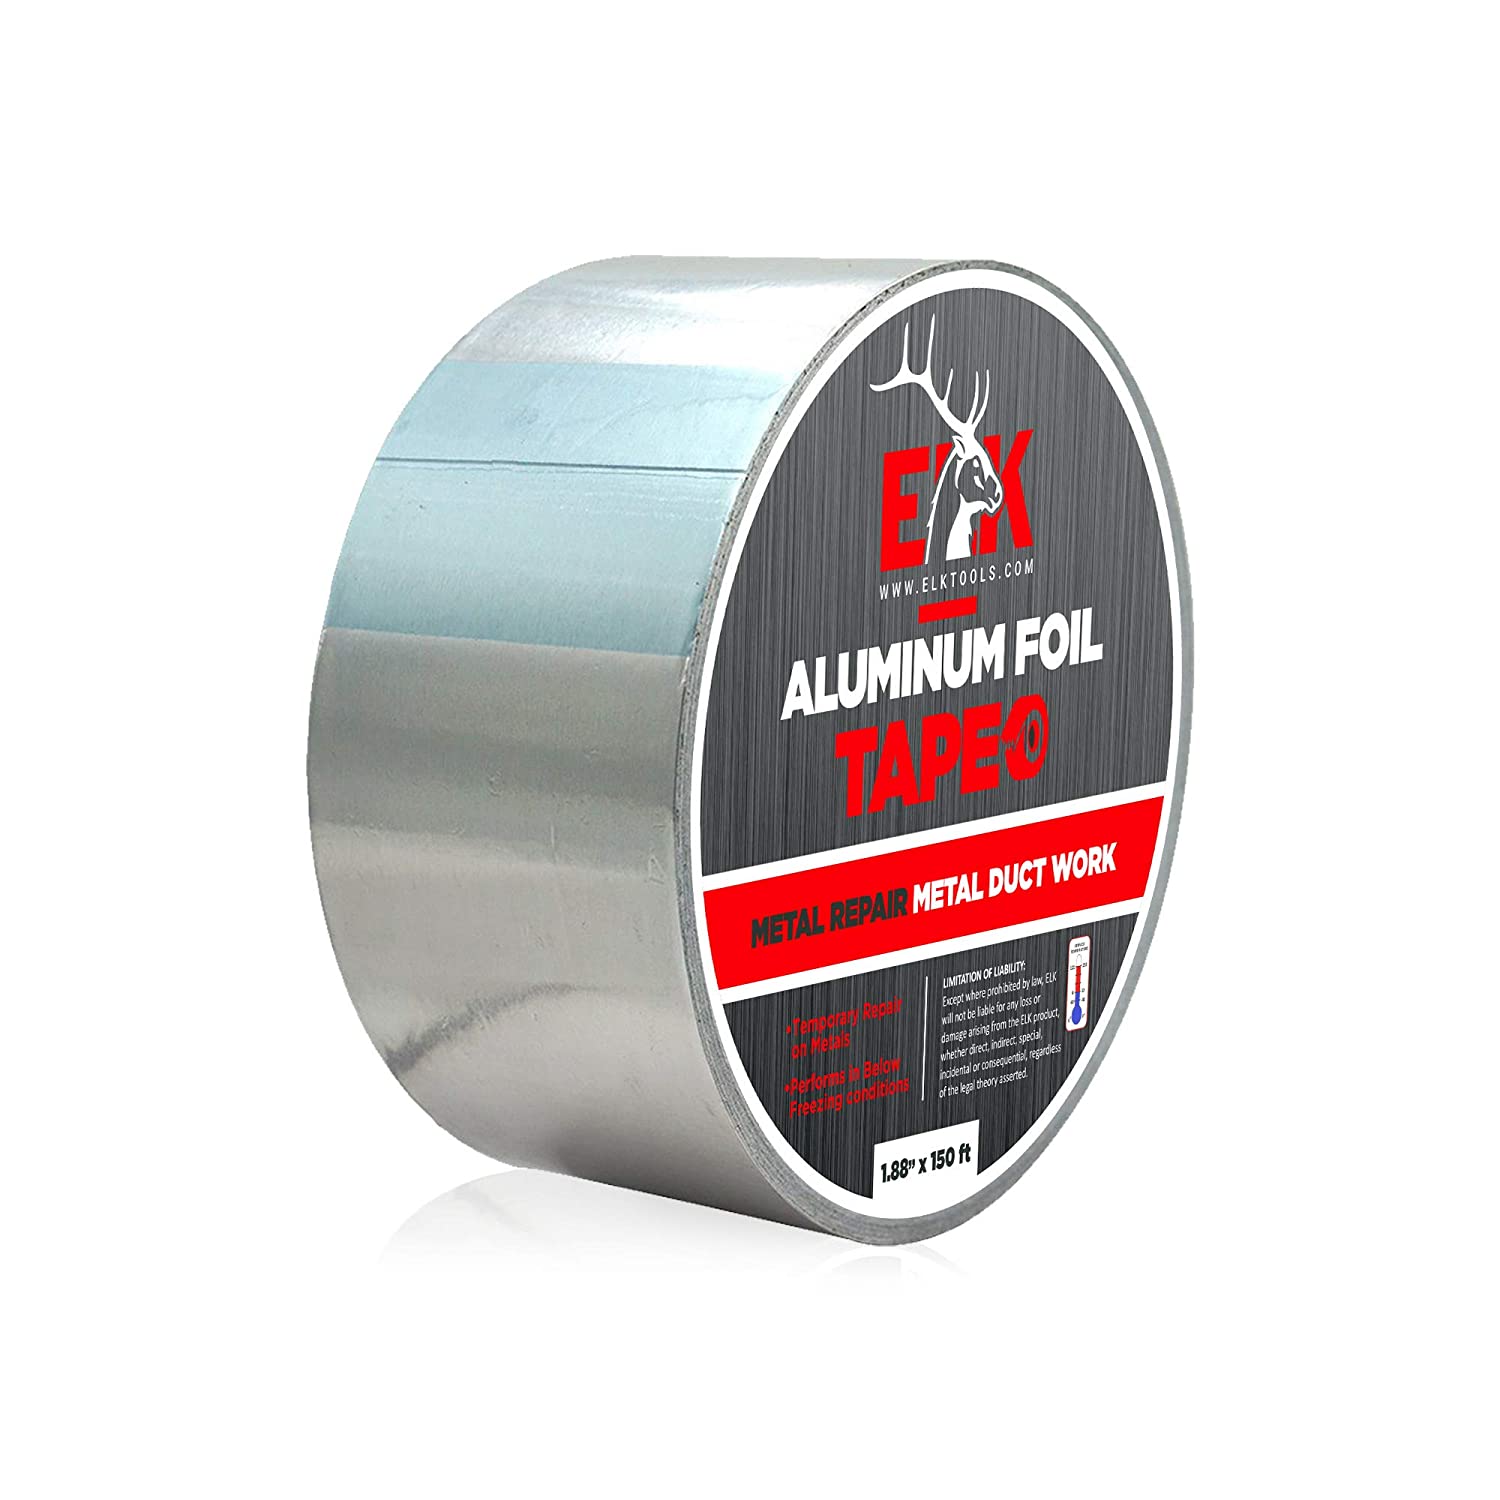 Industrial Grade Aluminum Foil Tape  2 Inches x 150 Ft Self Adhesive 